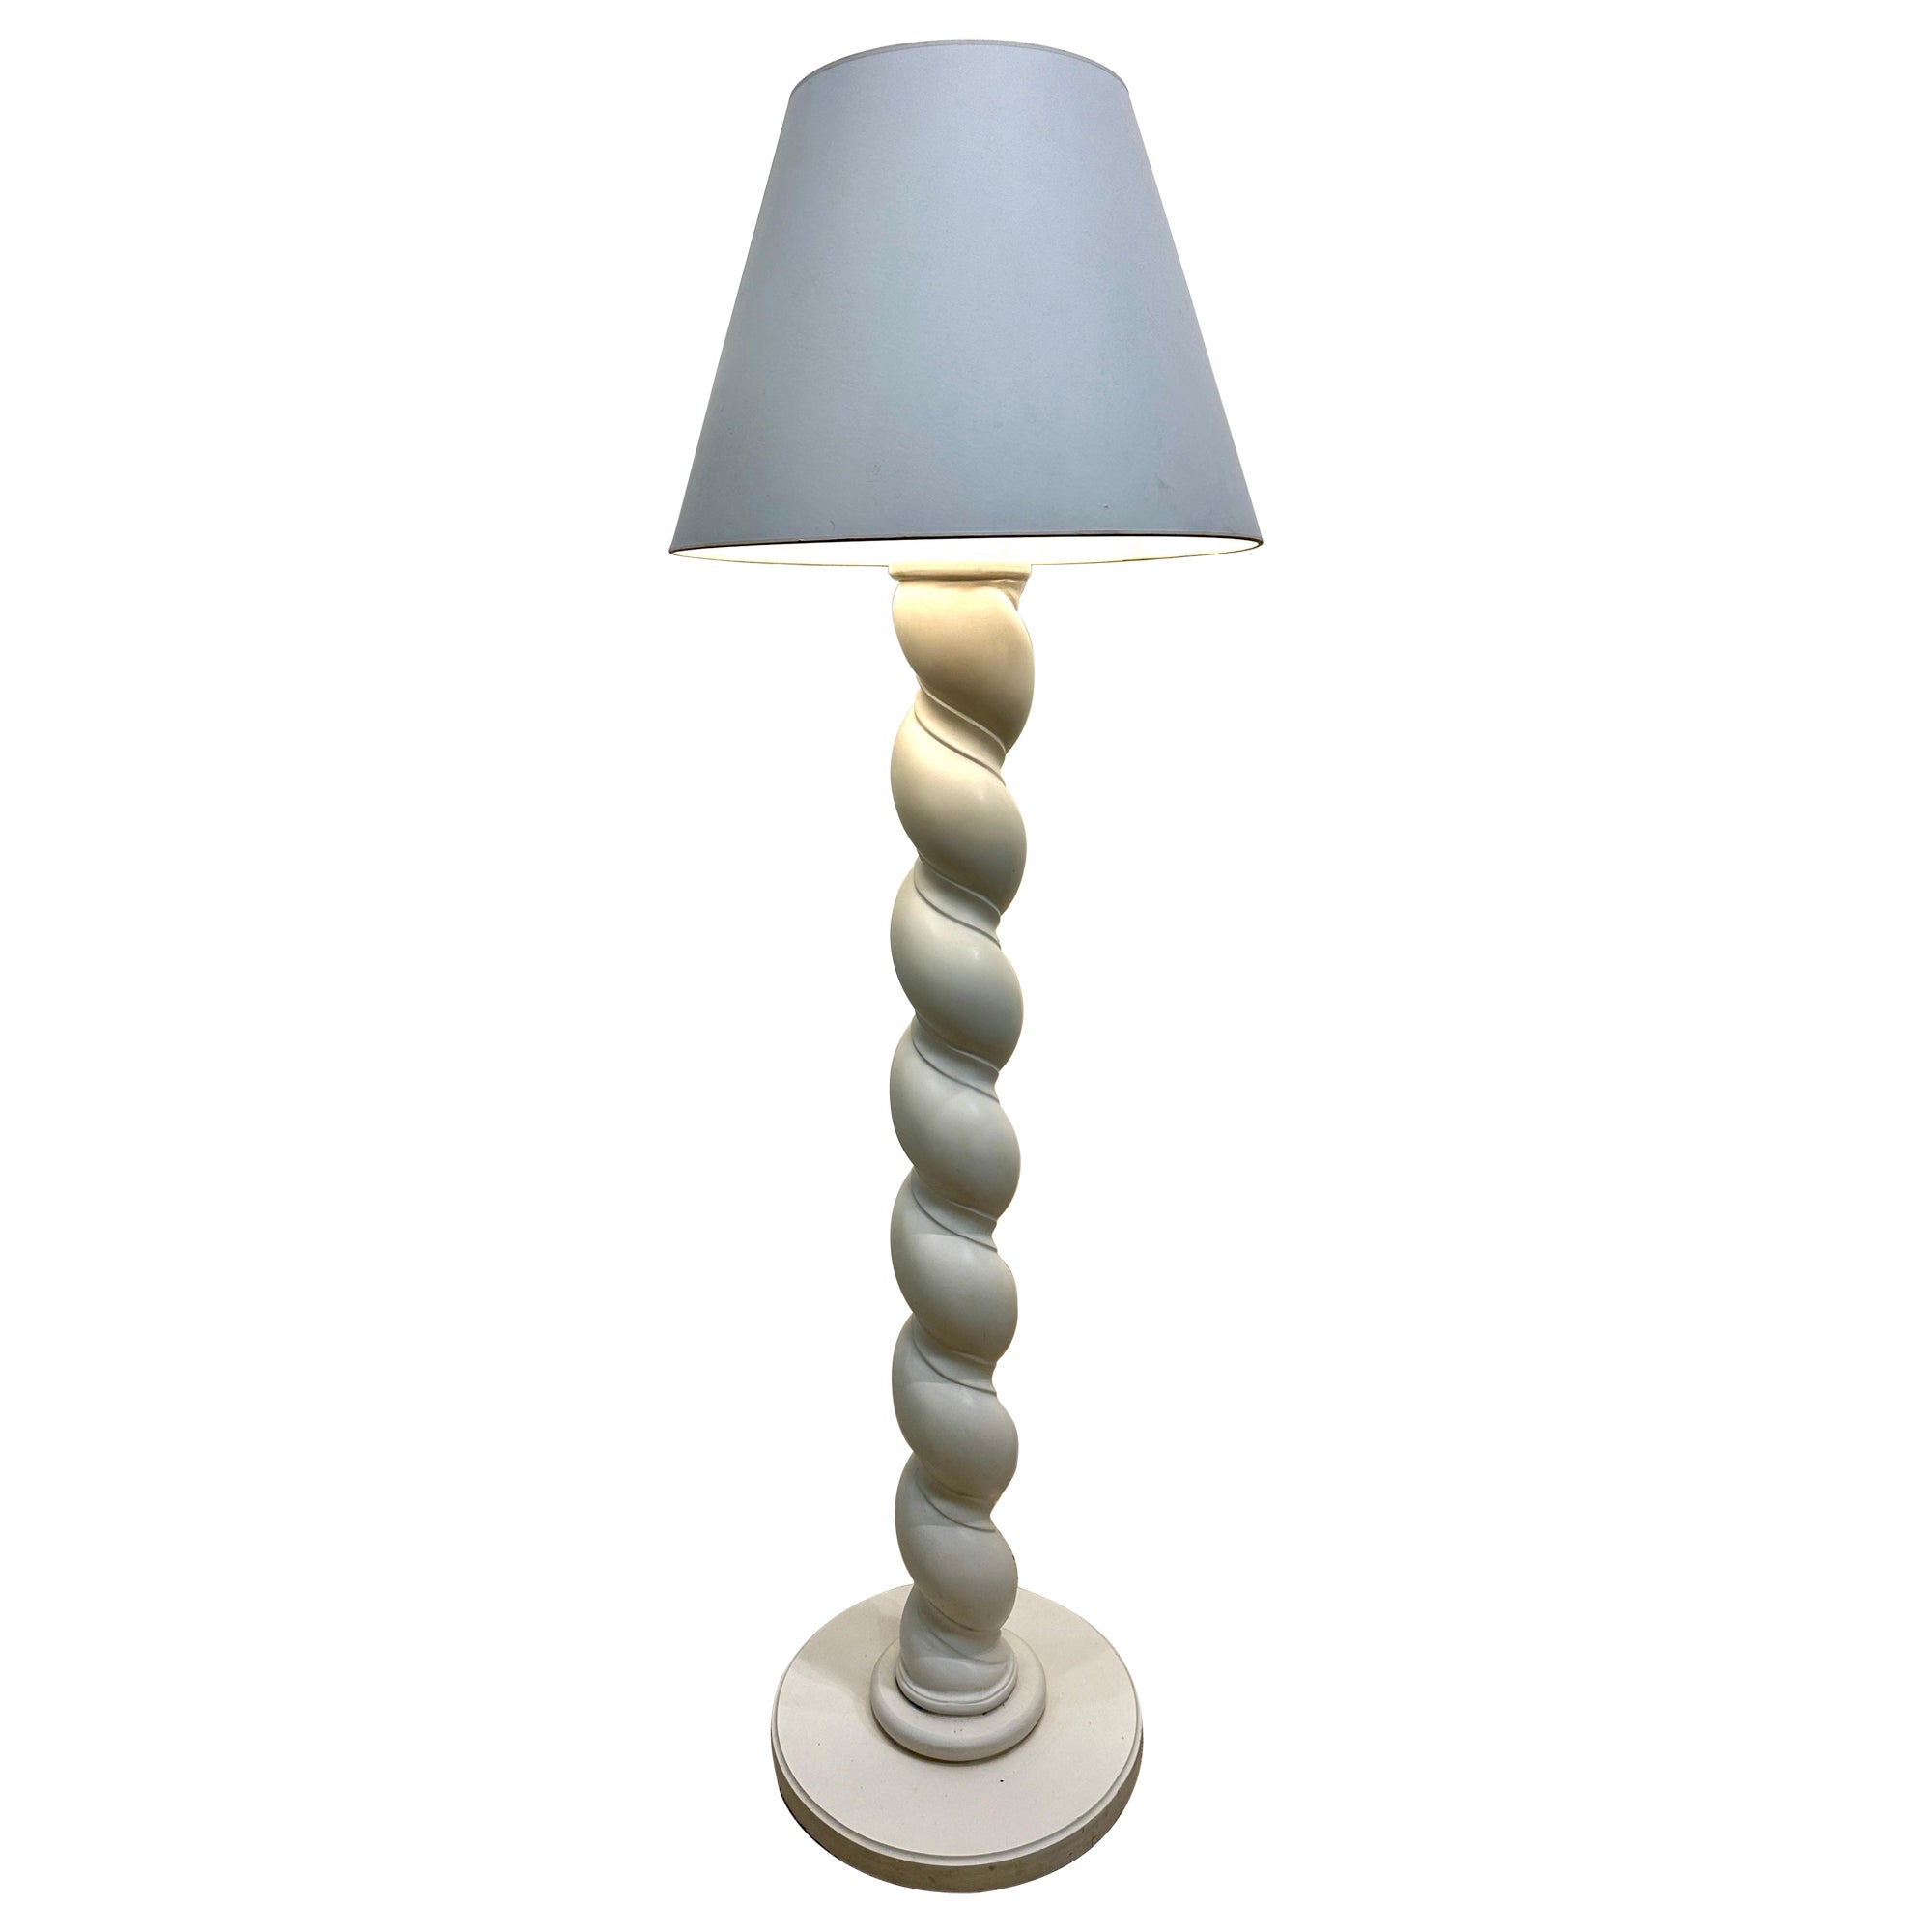 Extremely Rare Composition Plaster Floor Lamp w/ Spiraling Design by Sirmos For Sale